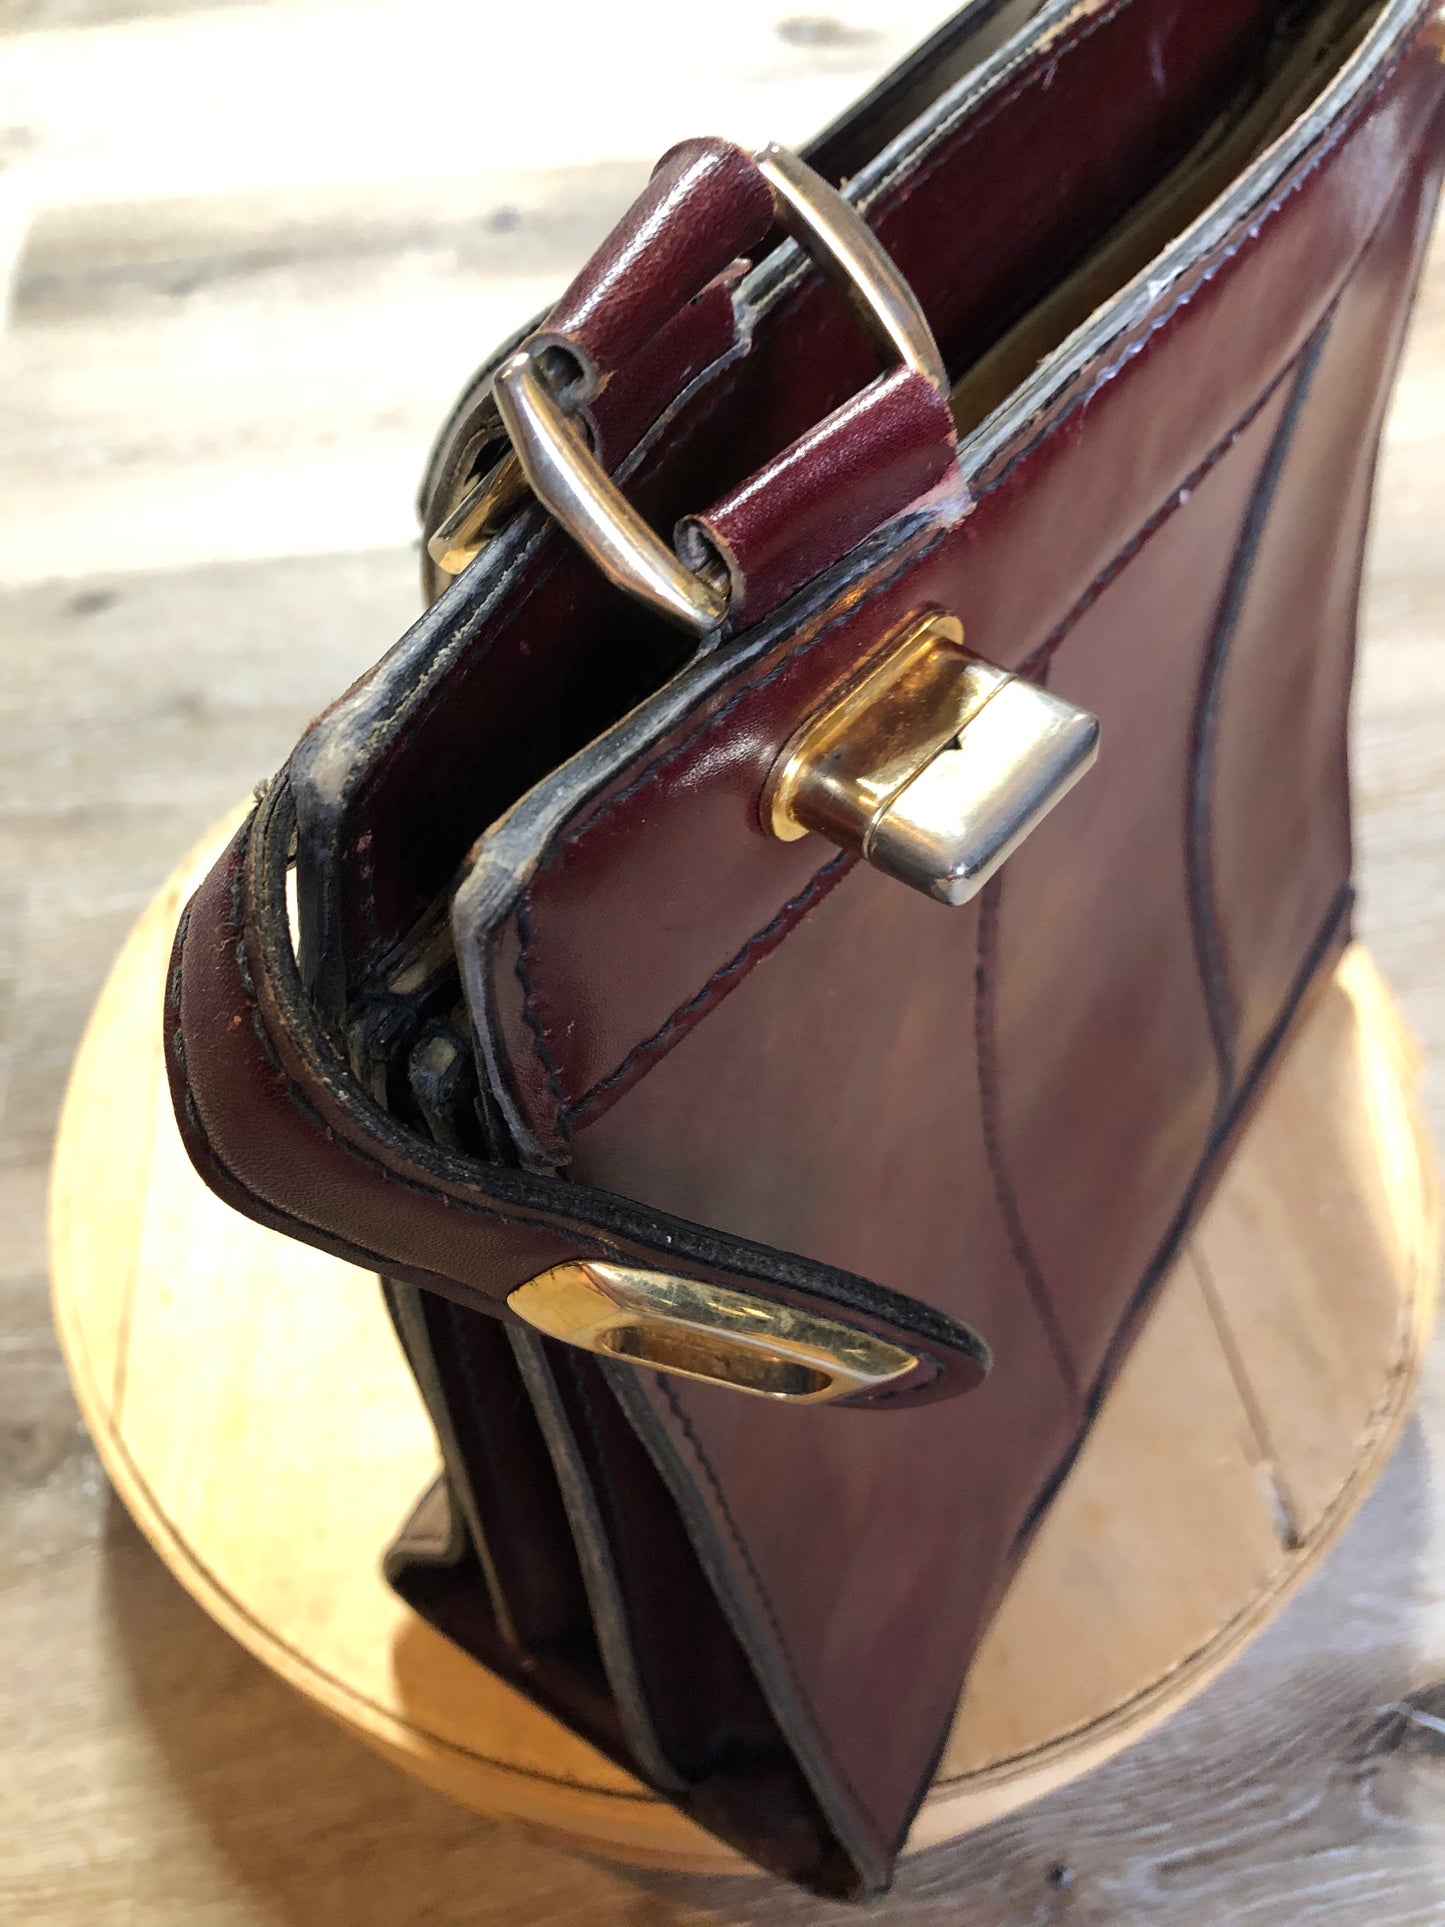 Kingspier Vintage - Caggiano deep red calfskin leather purse with brass hardware, two buckles on each side to allow the top to open fully, inside dividers and pockets. Made in Italy.